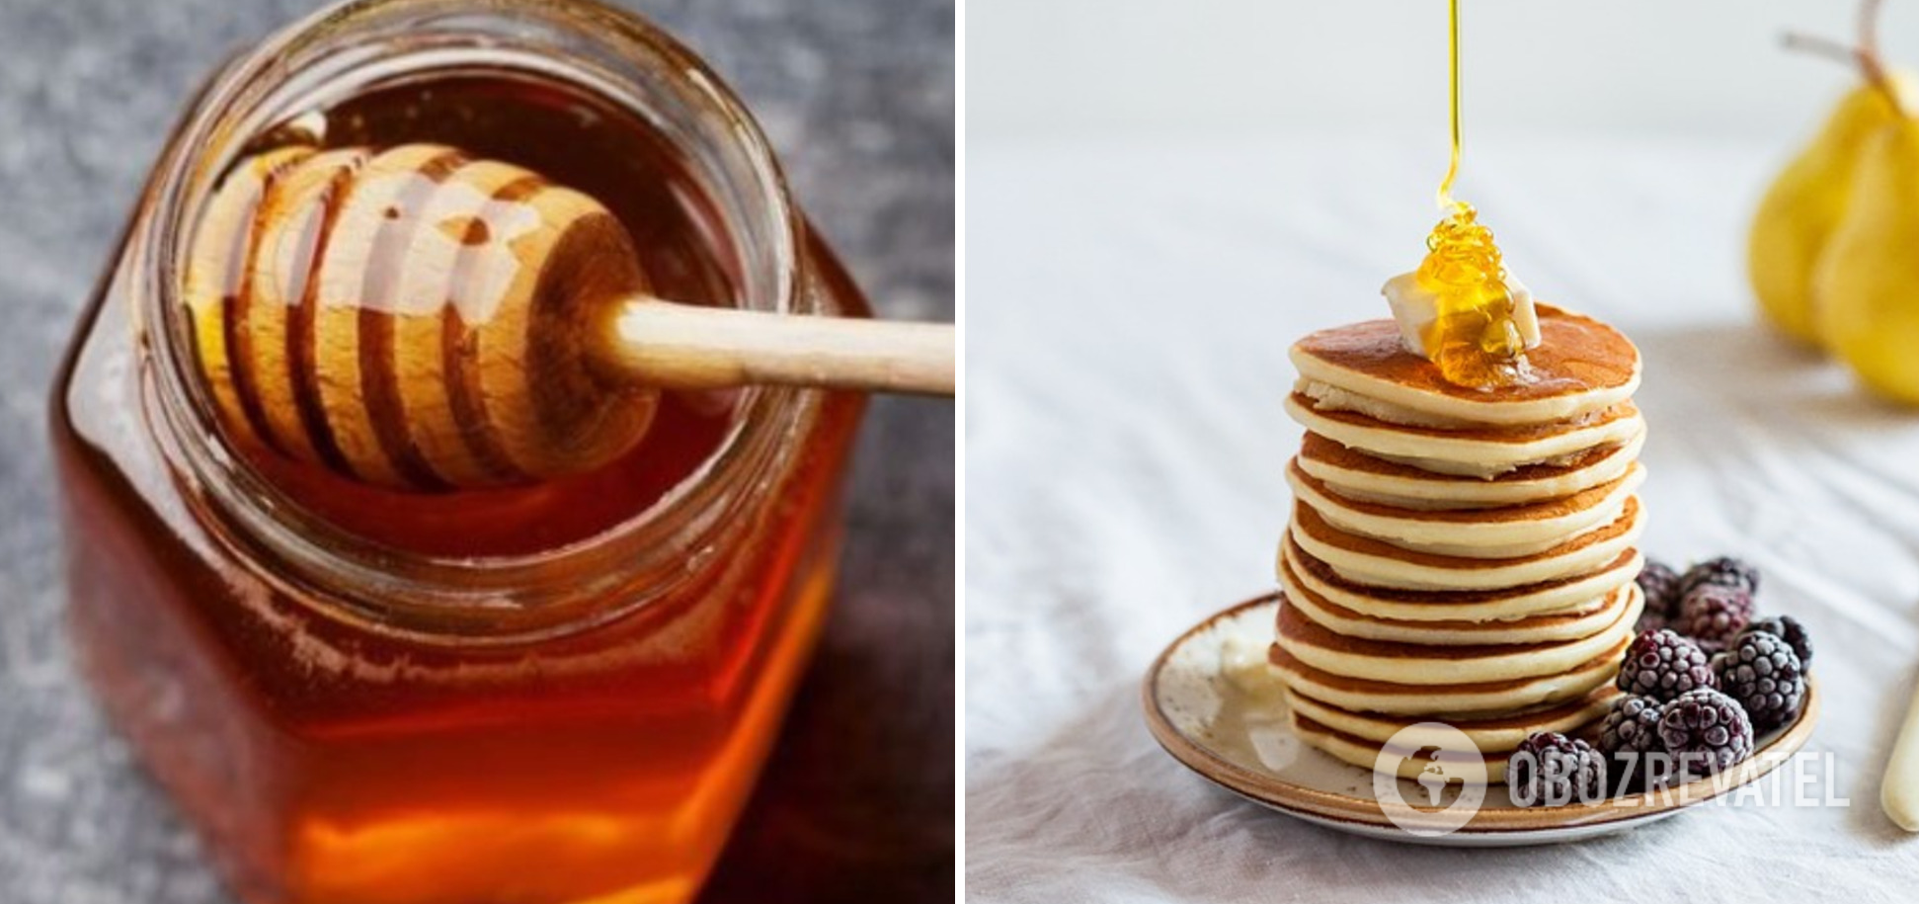 How to tell the difference between quality honey and fake